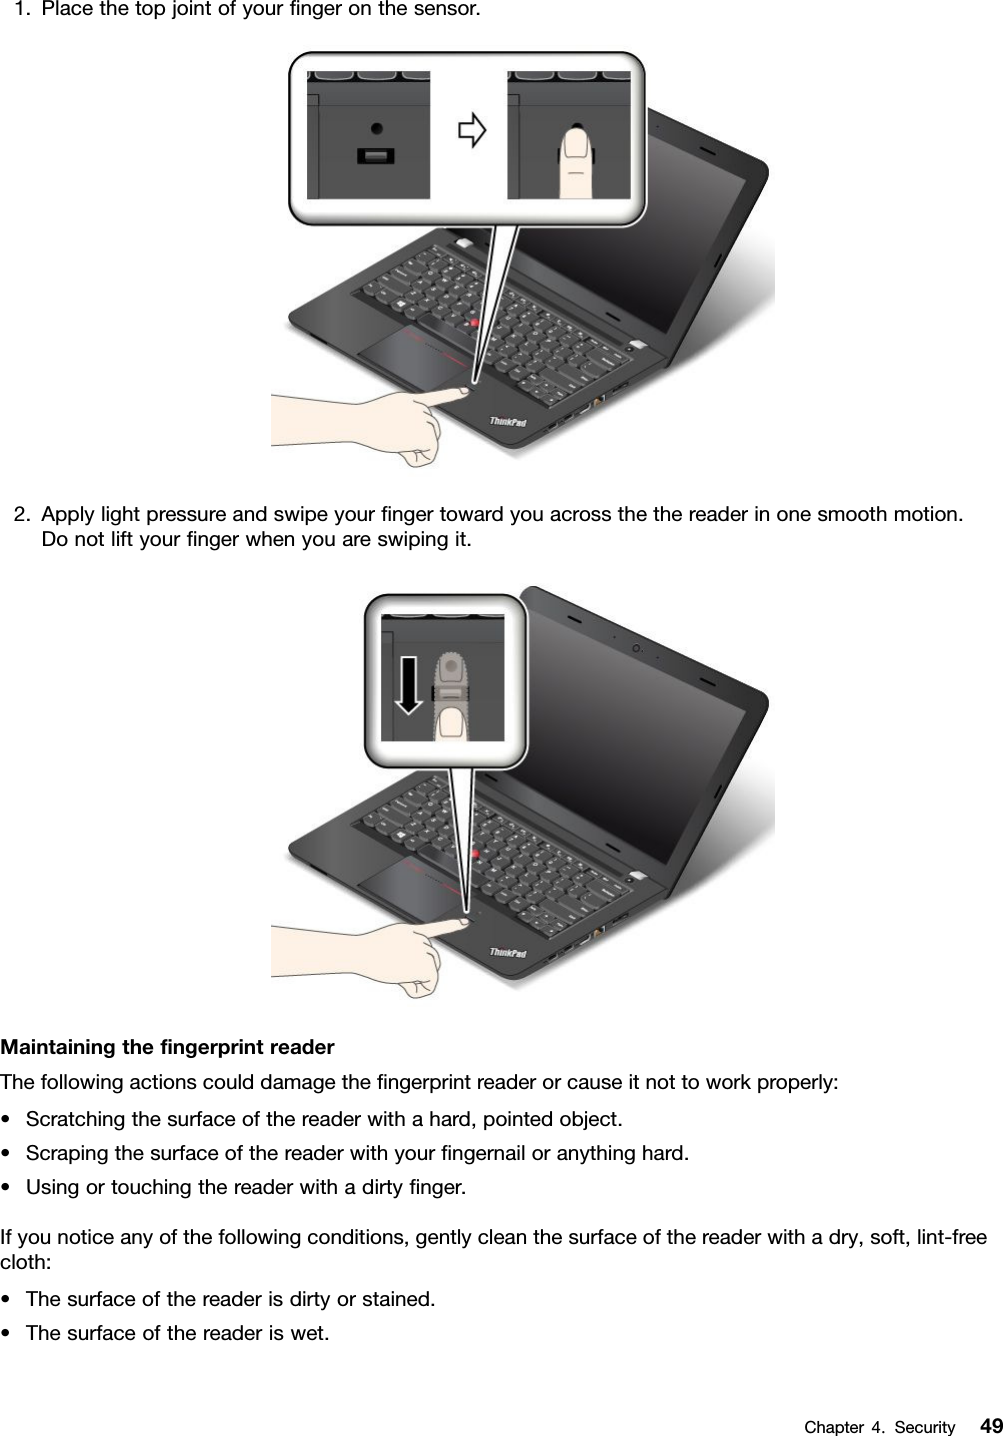 1. Place the top joint of your ﬁnger on the sensor.2. Apply light pressure and swipe your ﬁnger toward you across the the reader in one smooth motion.Do not lift your ﬁnger when you are swiping it.Maintaining the ﬁngerprint readerThe following actions could damage the ﬁngerprint reader or cause it not to work properly:• Scratching the surface of the reader with a hard, pointed object.• Scraping the surface of the reader with your ﬁngernail or anything hard.• Using or touching the reader with a dirty ﬁnger.If you notice any of the following conditions, gently clean the surface of the reader with a dry, soft, lint-freecloth:• The surface of the reader is dirty or stained.• The surface of the reader is wet.Chapter 4.Security 49